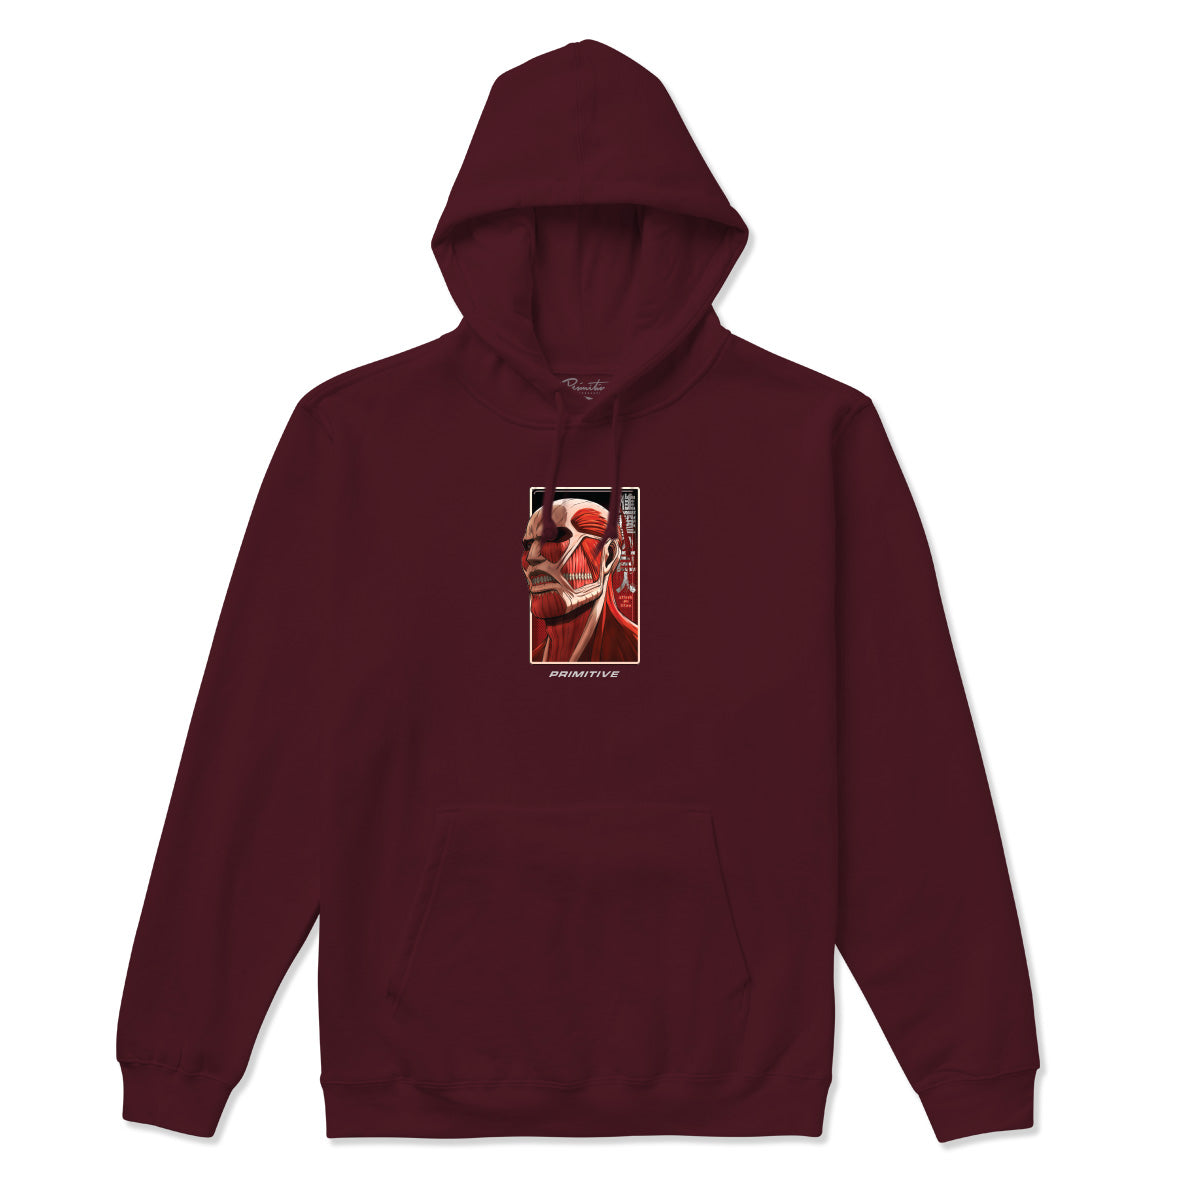 Primitive x Titans Colossal Dirty P Hoodie - Burgundy image 1